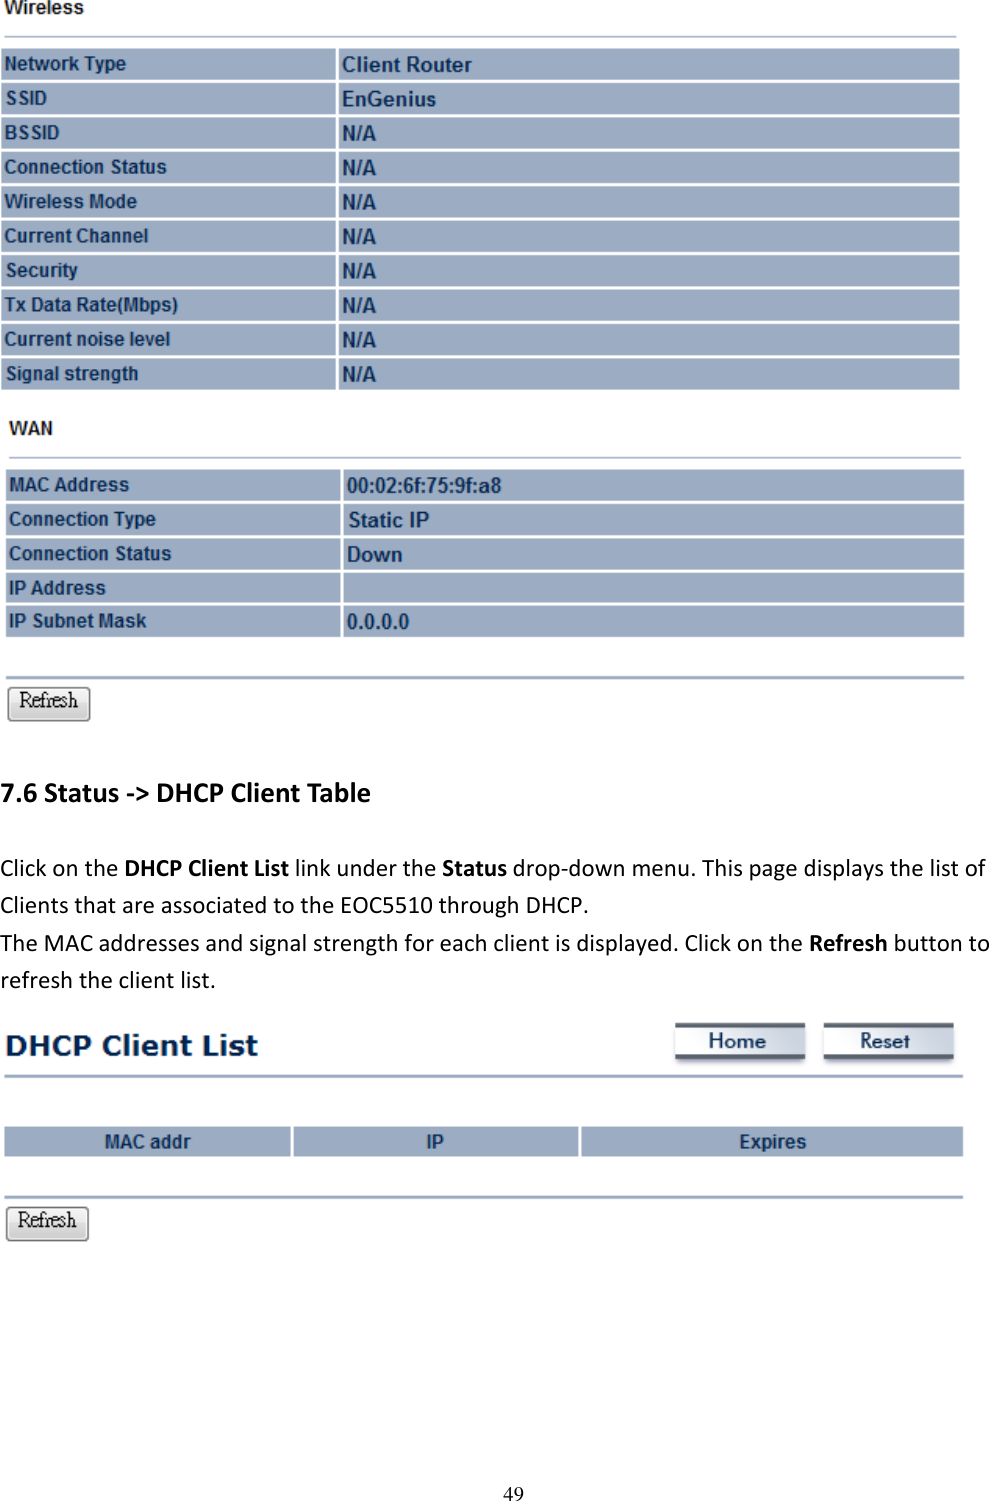 49   7.6 Status -&gt; DHCP Client Table Click on the DHCP Client List link under the Status drop-down menu. This page displays the list of Clients that are associated to the EOC5510 through DHCP. The MAC addresses and signal strength for each client is displayed. Click on the Refresh button to refresh the client list.       